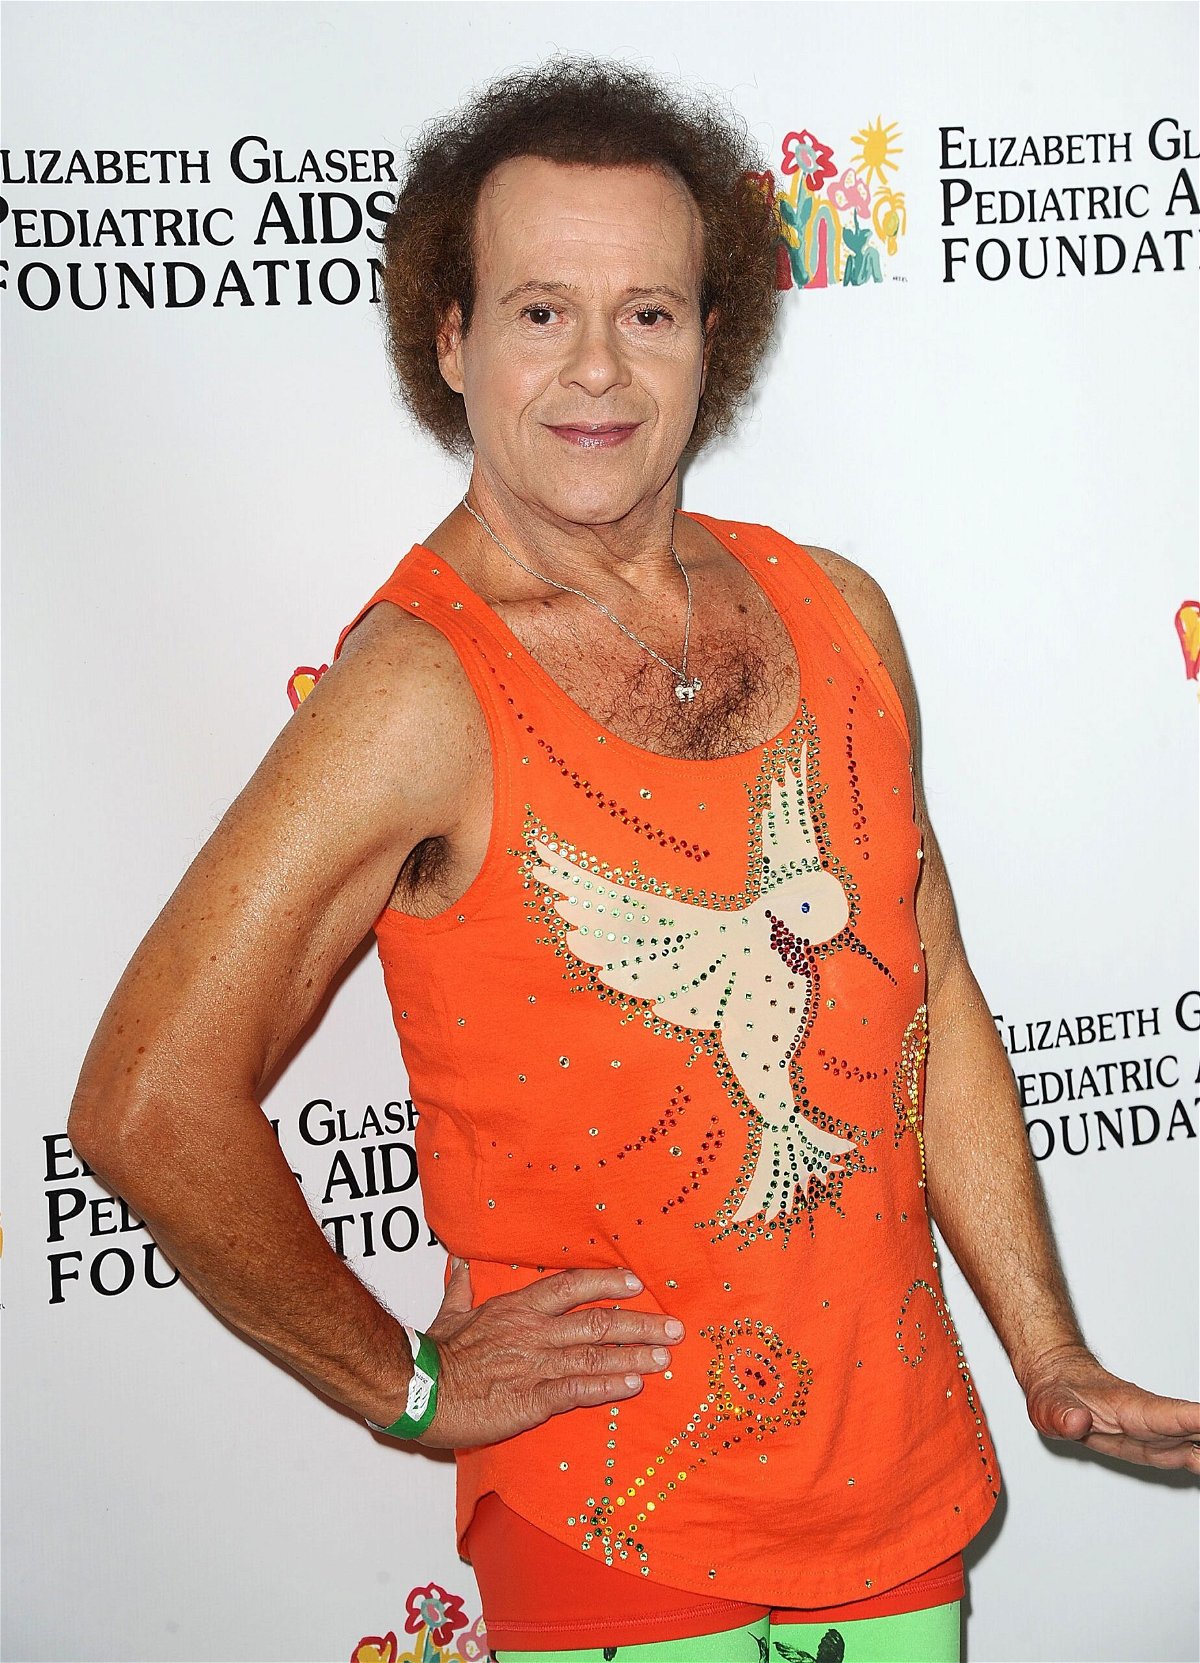 Richard Simmons is ‘happy’ as he celebrated a ‘milestone’ birthday